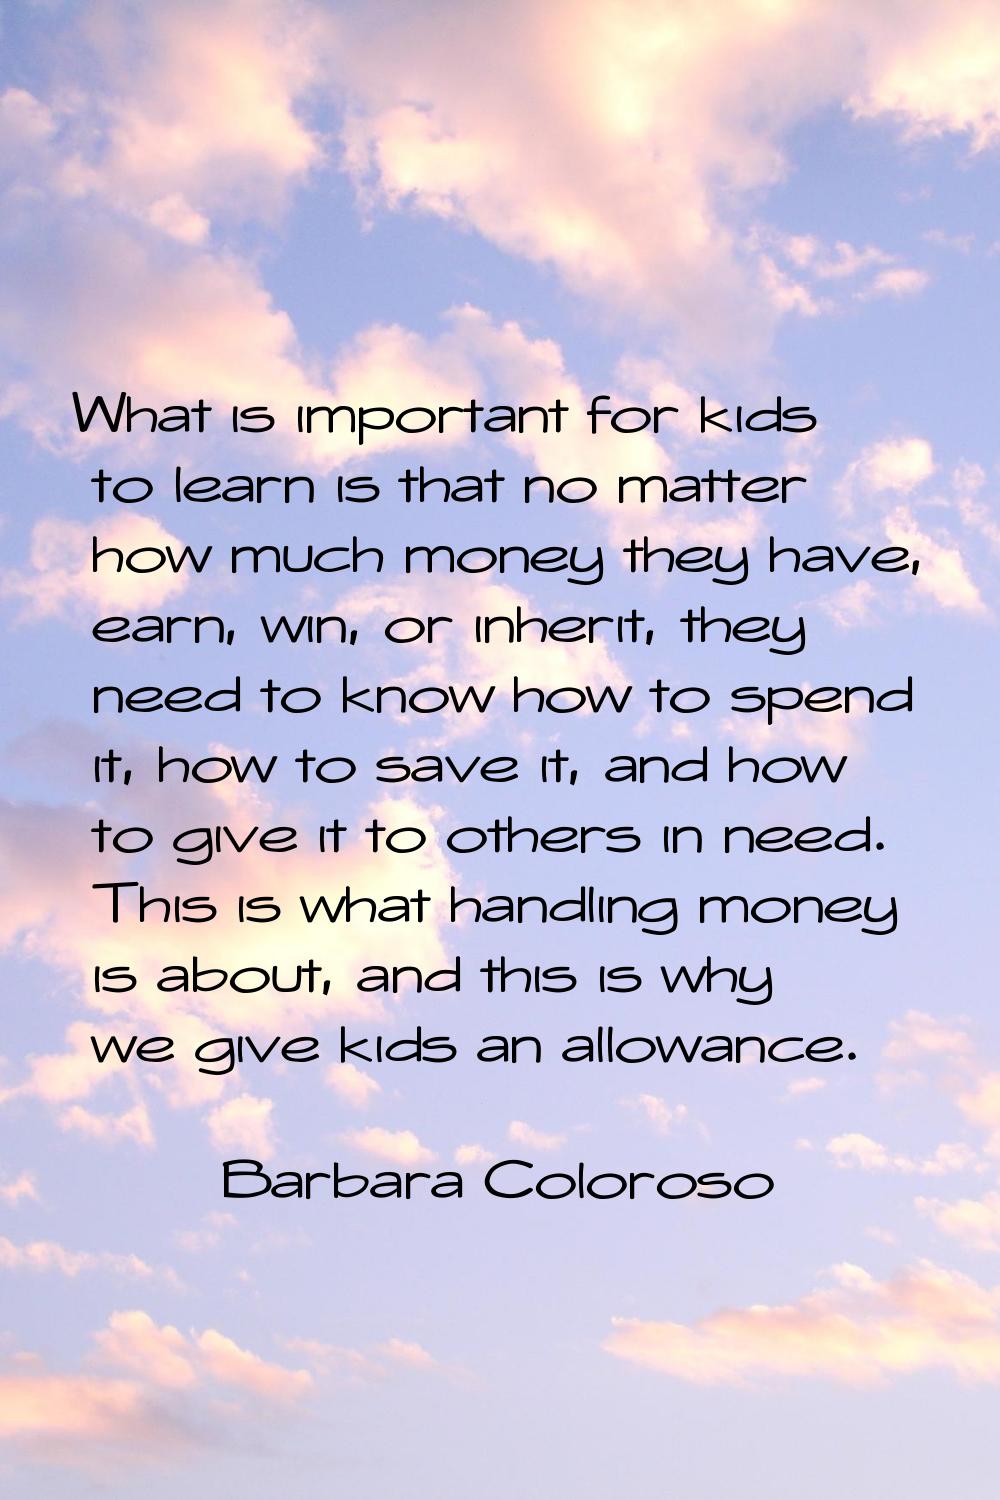 What is important for kids to learn is that no matter how much money they have, earn, win, or inher